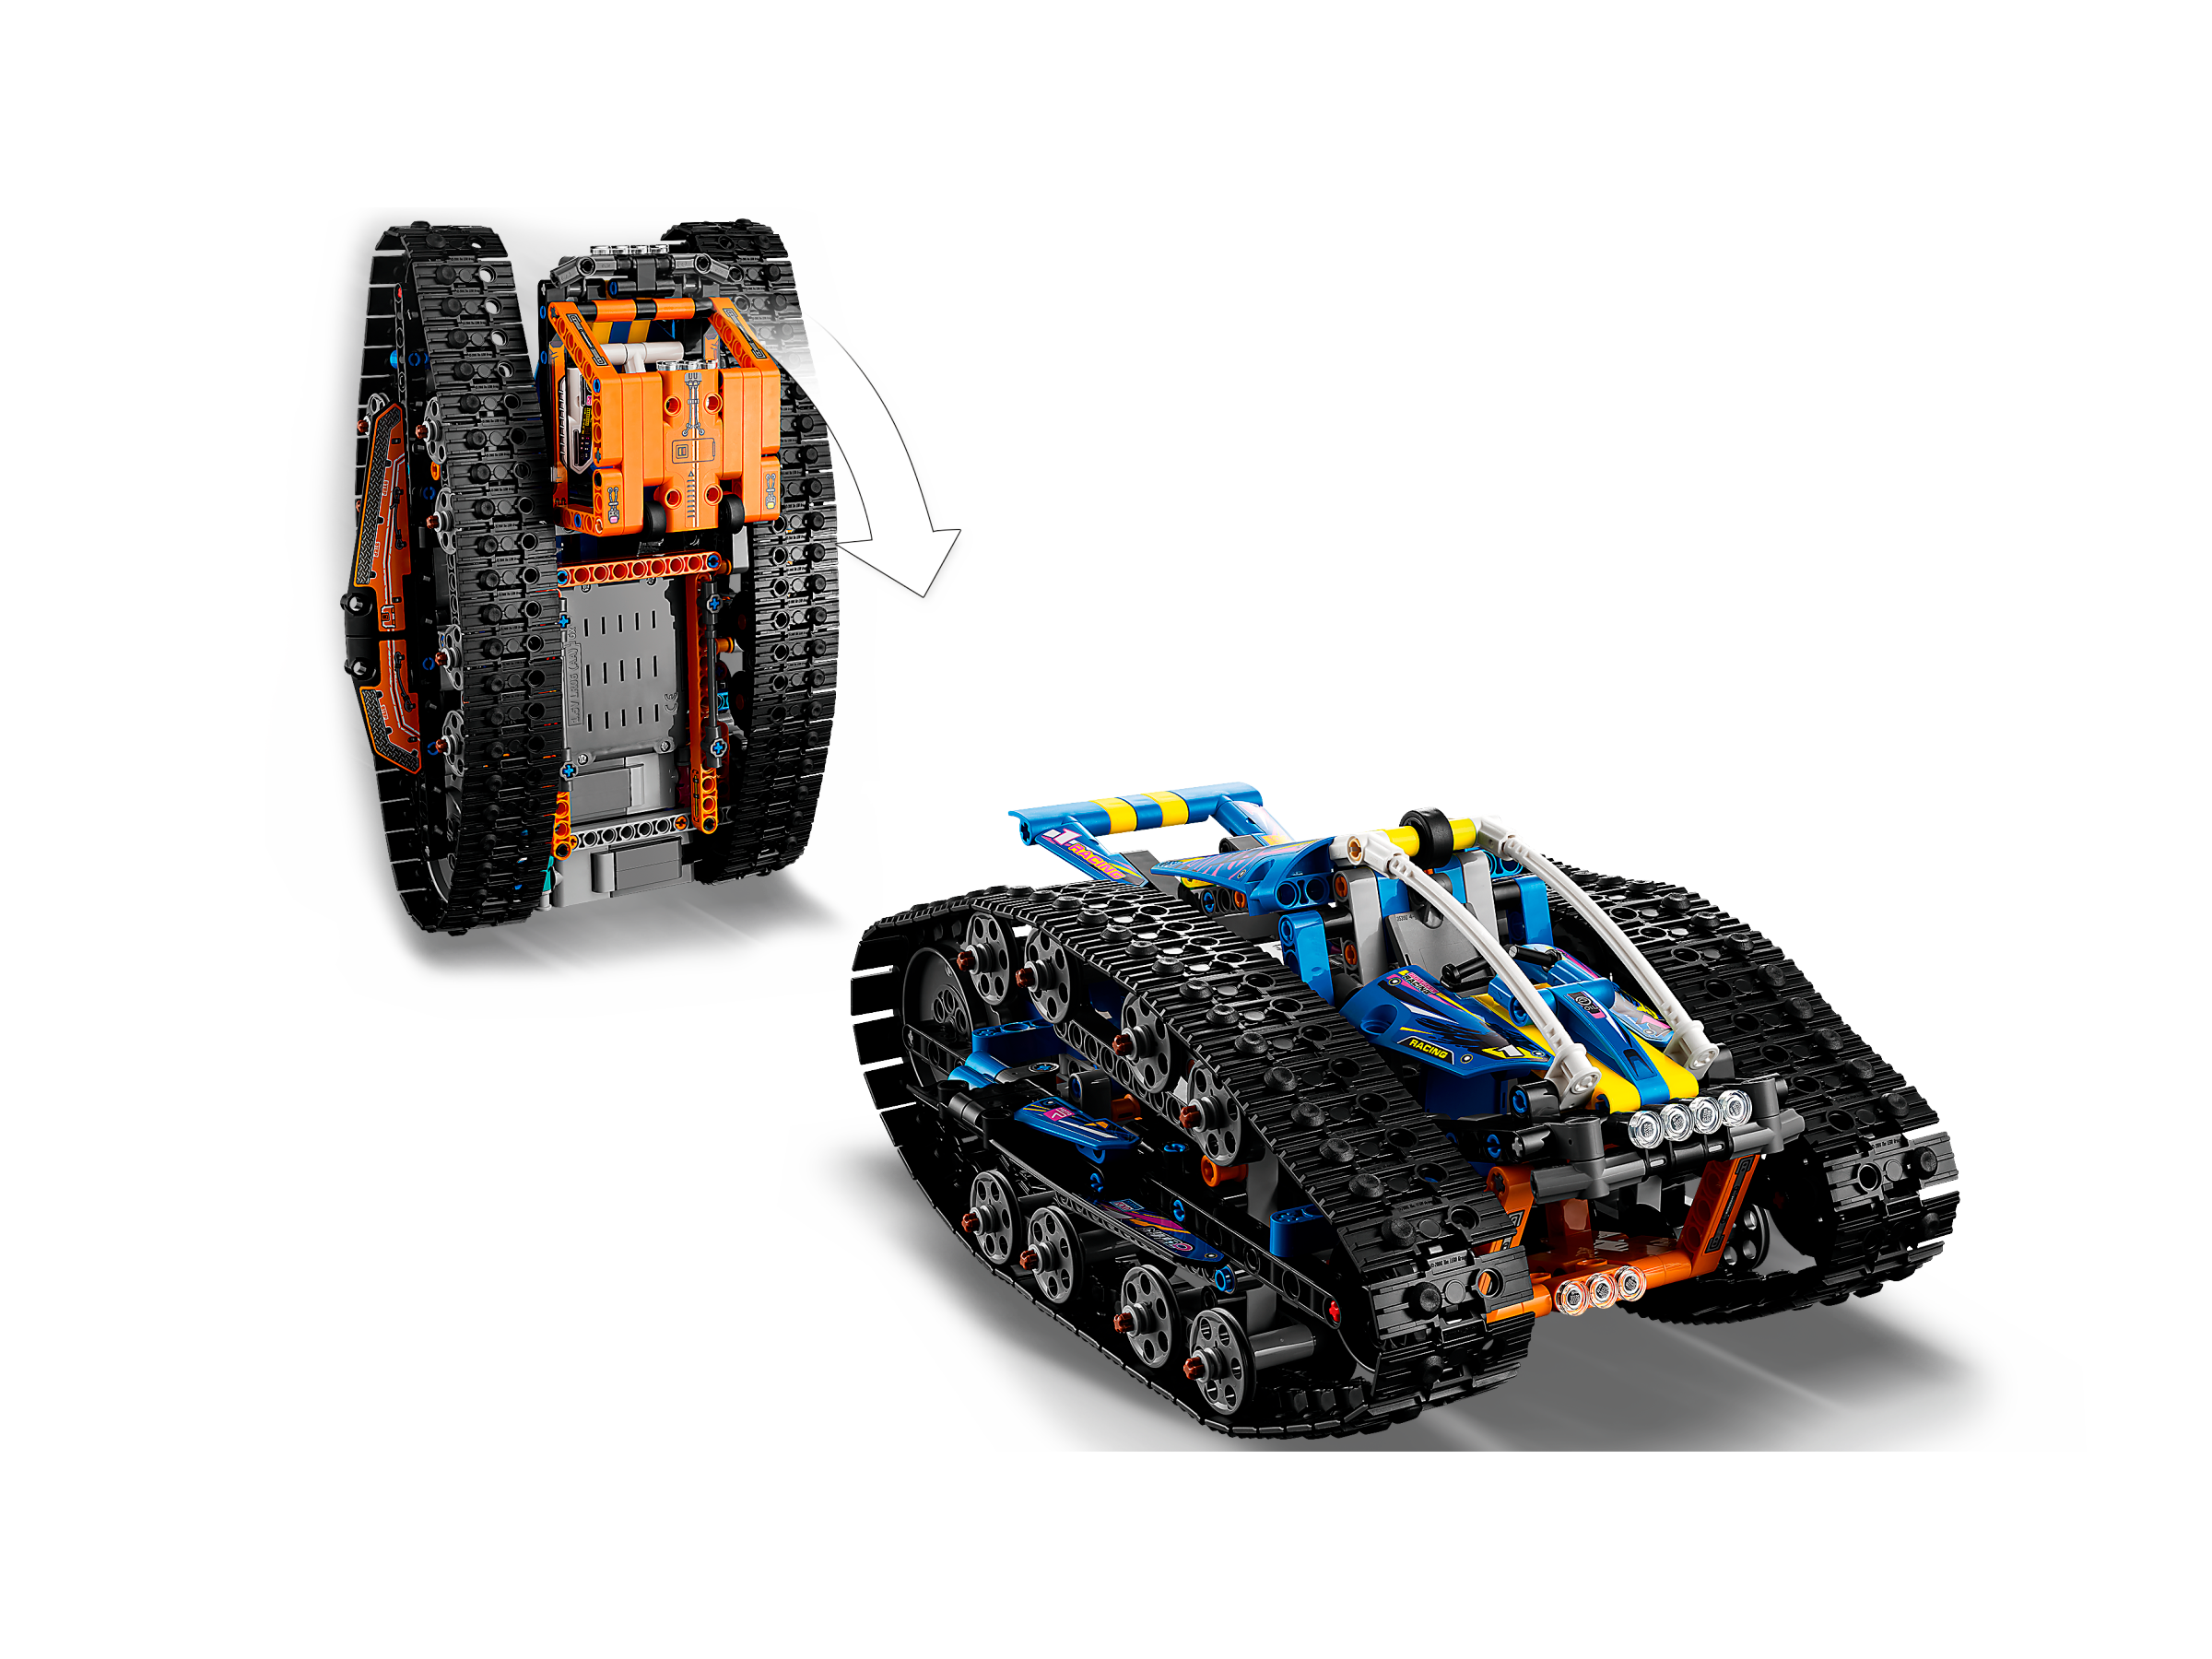 App-Controlled Transformation Vehicle 42140 | Technic™ | Buy 